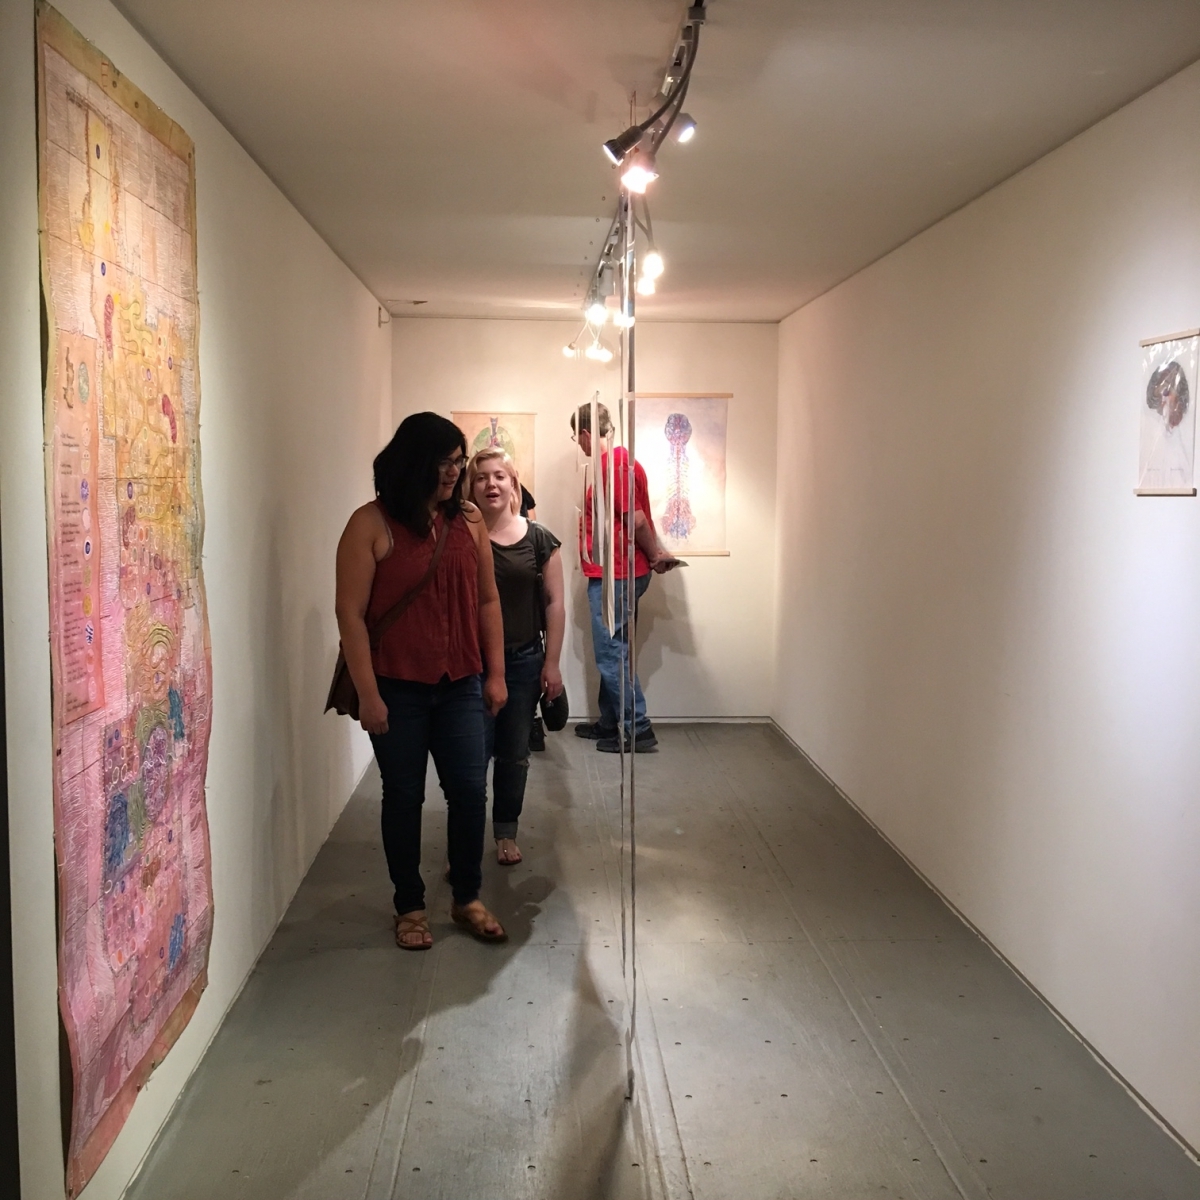  Monica Aissa Martinez, Cella, Third Friday exhibition opening with visitors, 3-18-16Photo credit: Ted Decker 